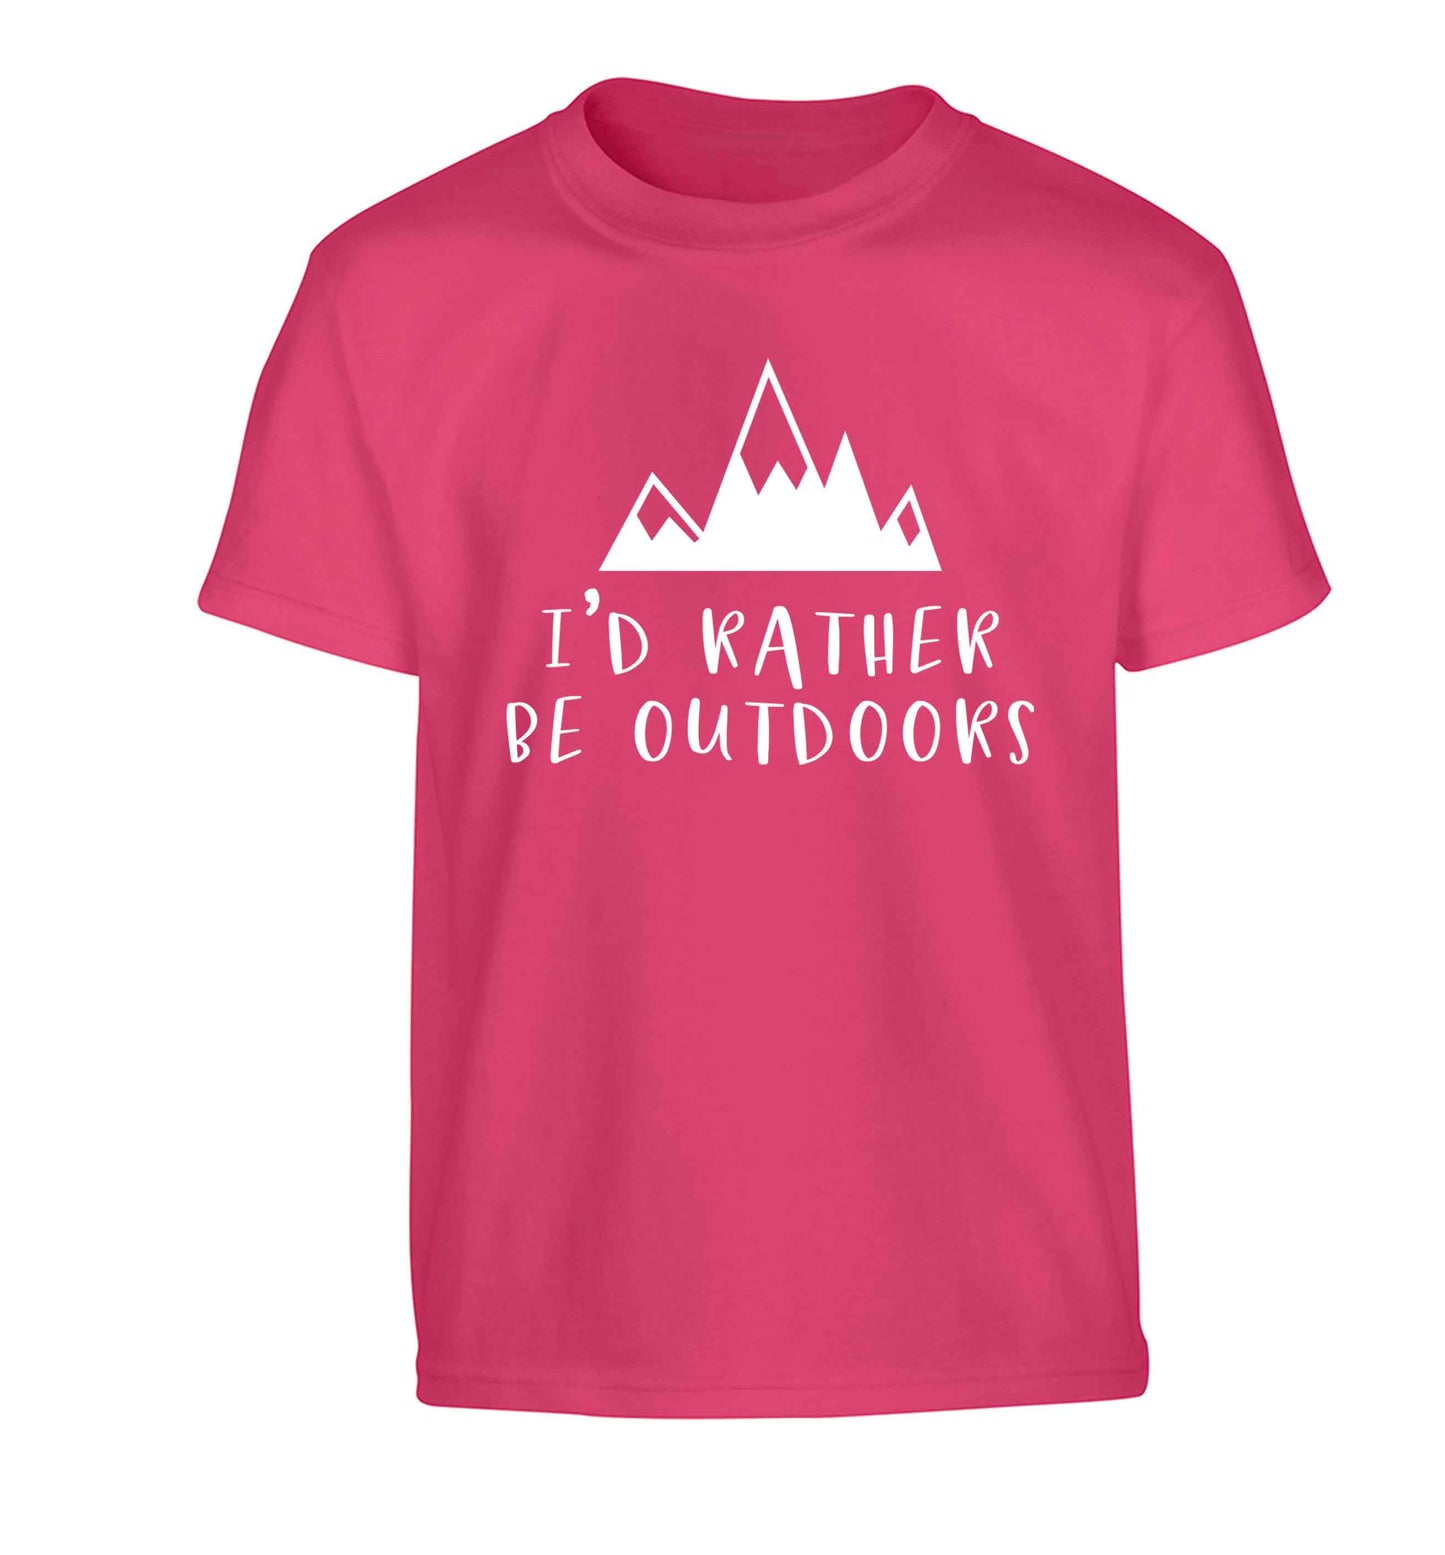 I'd rather be outdoors Children's pink Tshirt 12-13 Years